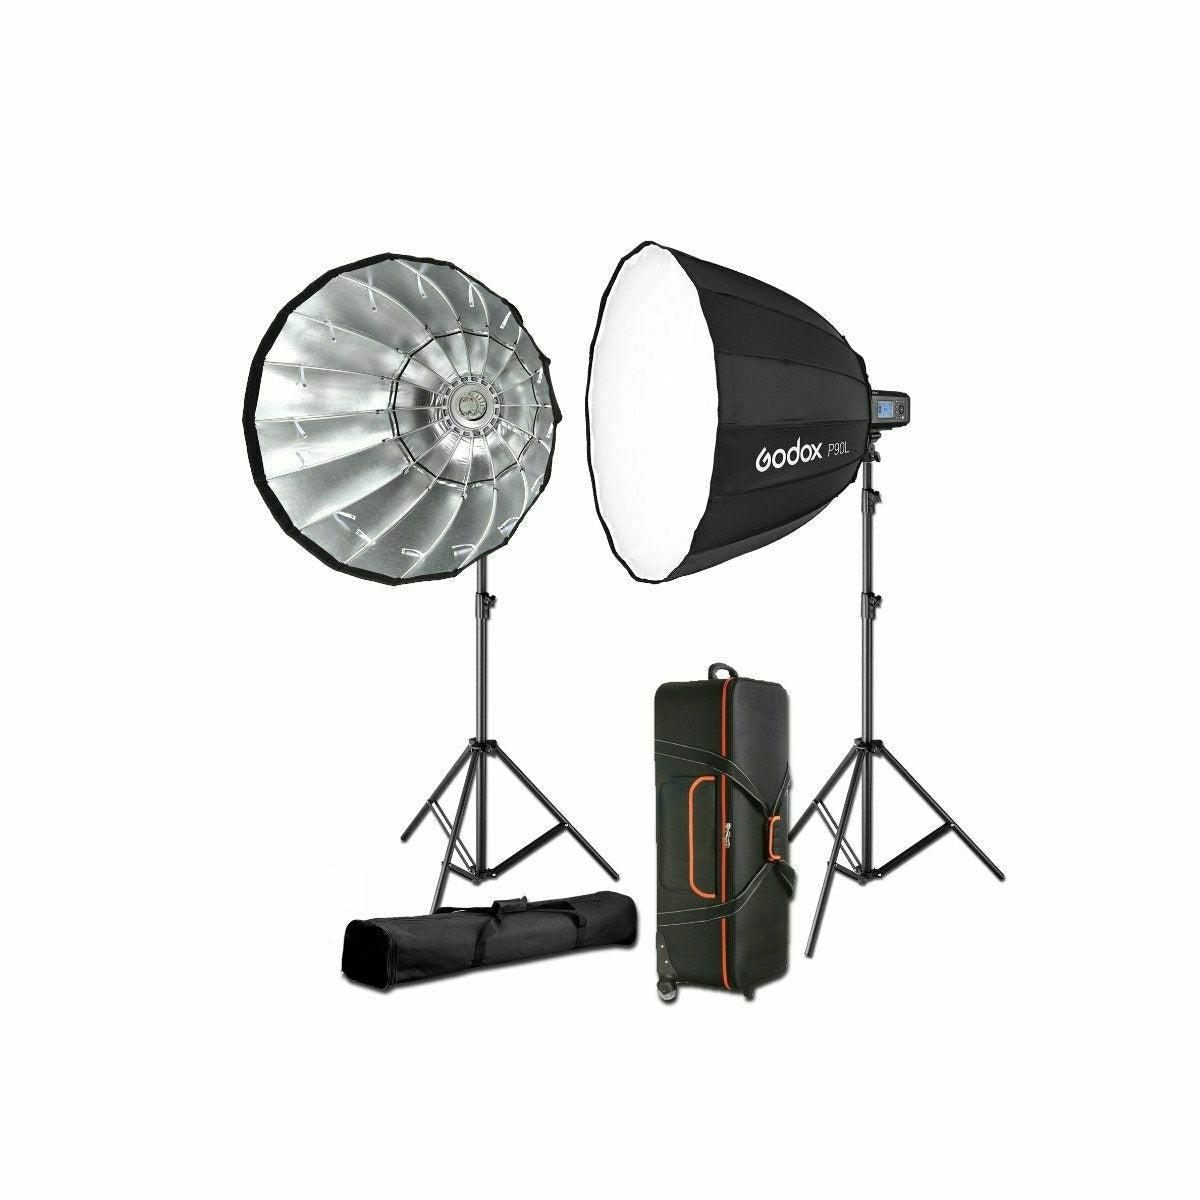 cartel recinto Preparación Godox AD600 Pro KIT -2x 600ws flash kit with 2 batteries, 2 softboxes, 1  tirgger and 2 stands | Dragon Image